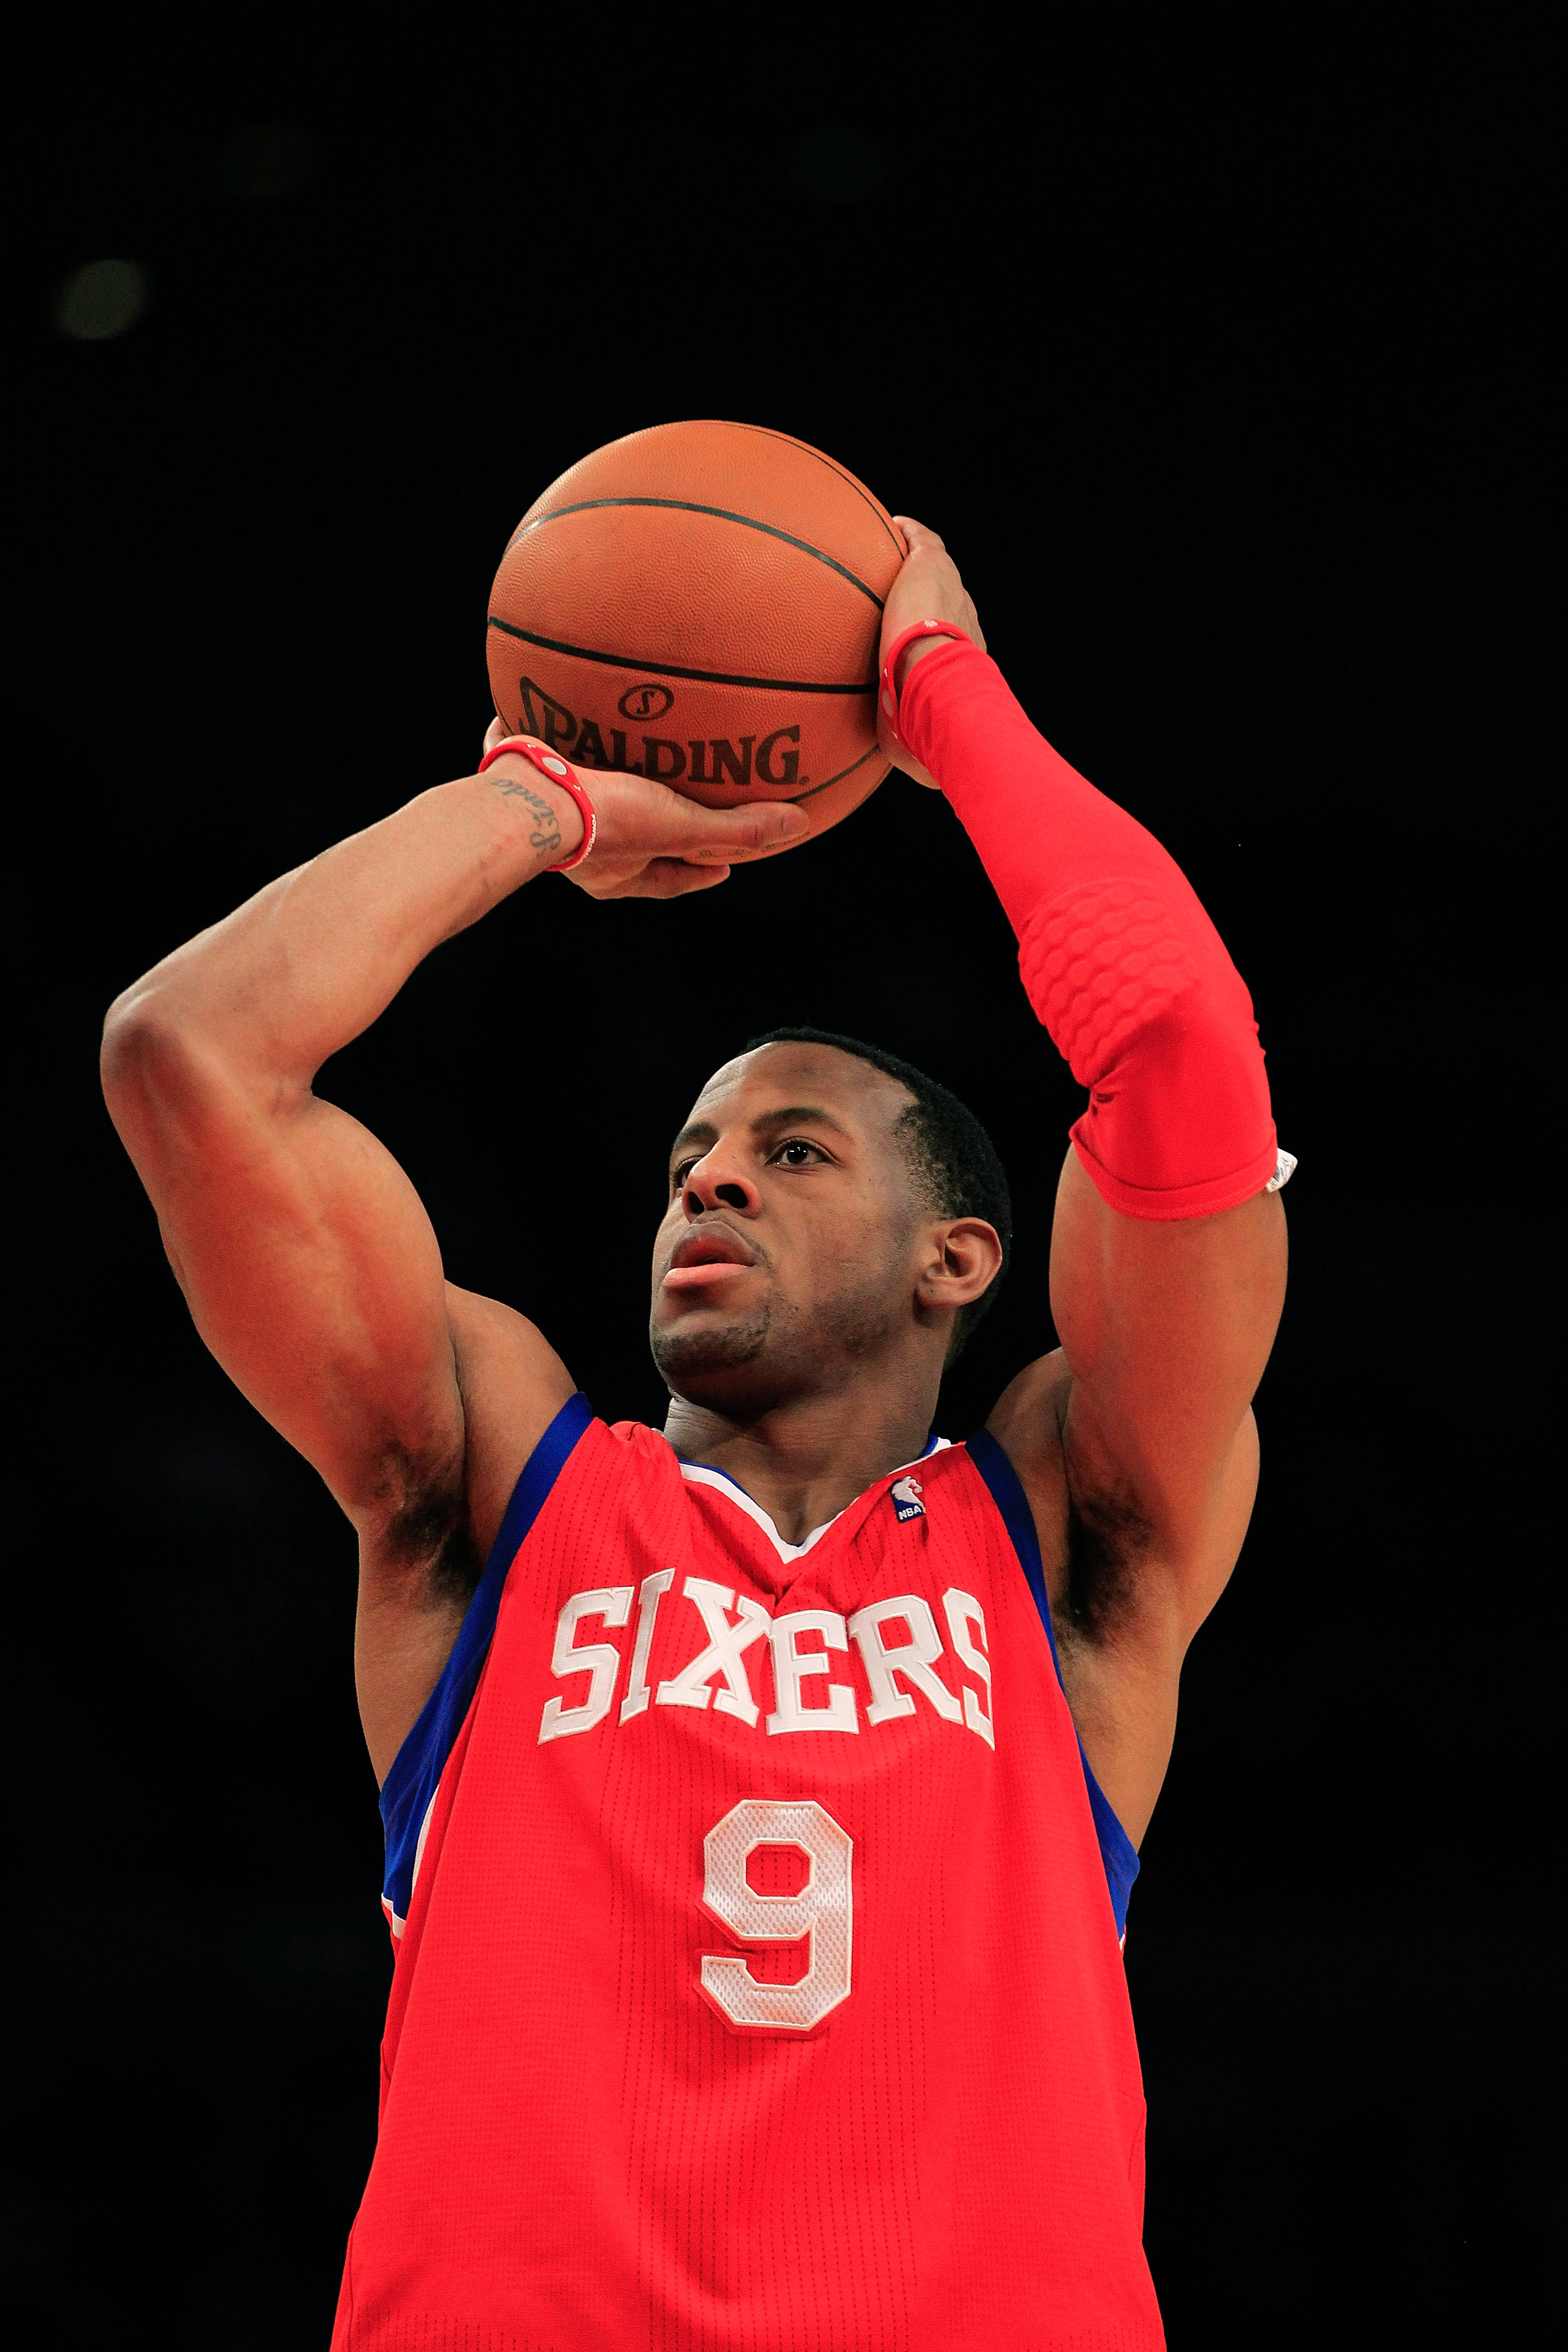 NEW YORK, NY - FEBRUARY 06:  Andre Iguodala #9 of the Philadelphia 76ers shoots a free throw against the New York Knicks at Madison Square Garden on February 6, 2011 in New York City. NOTE TO USER: User expressly acknowledges and agrees that, by downloadi